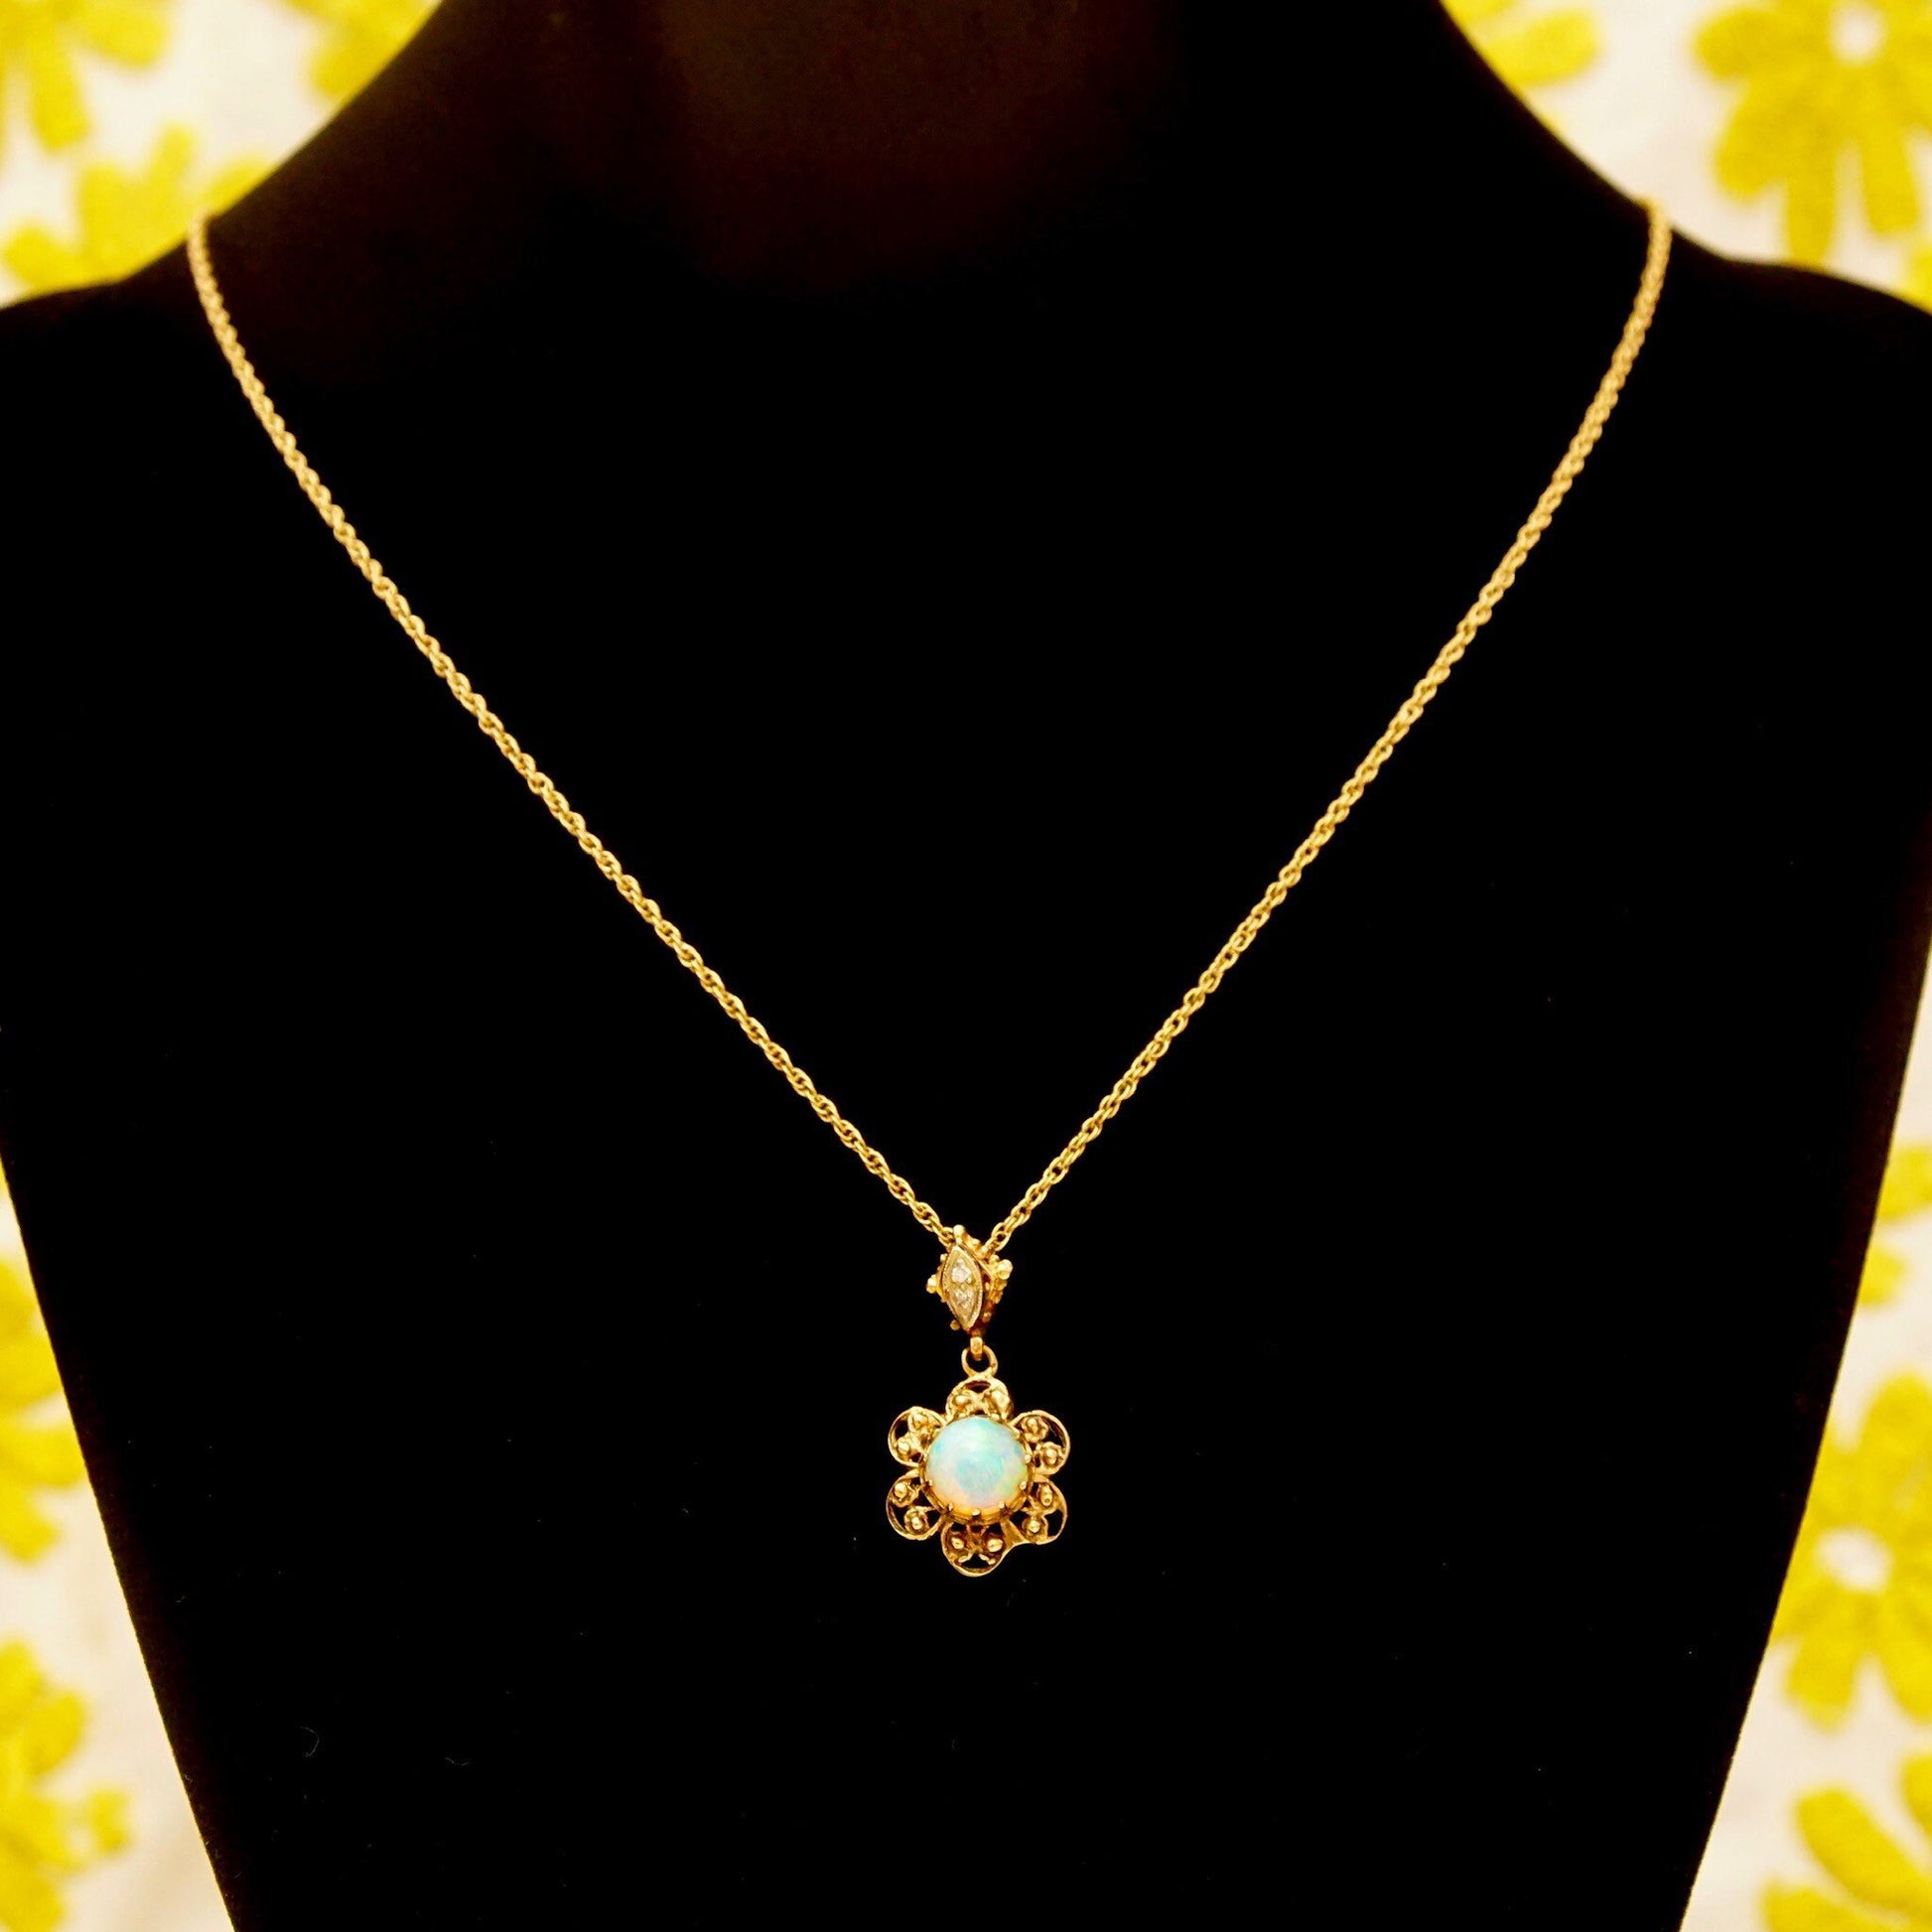 14K gold filigree opal flower pendant necklace with diamond accents on loose rope chain against floral background